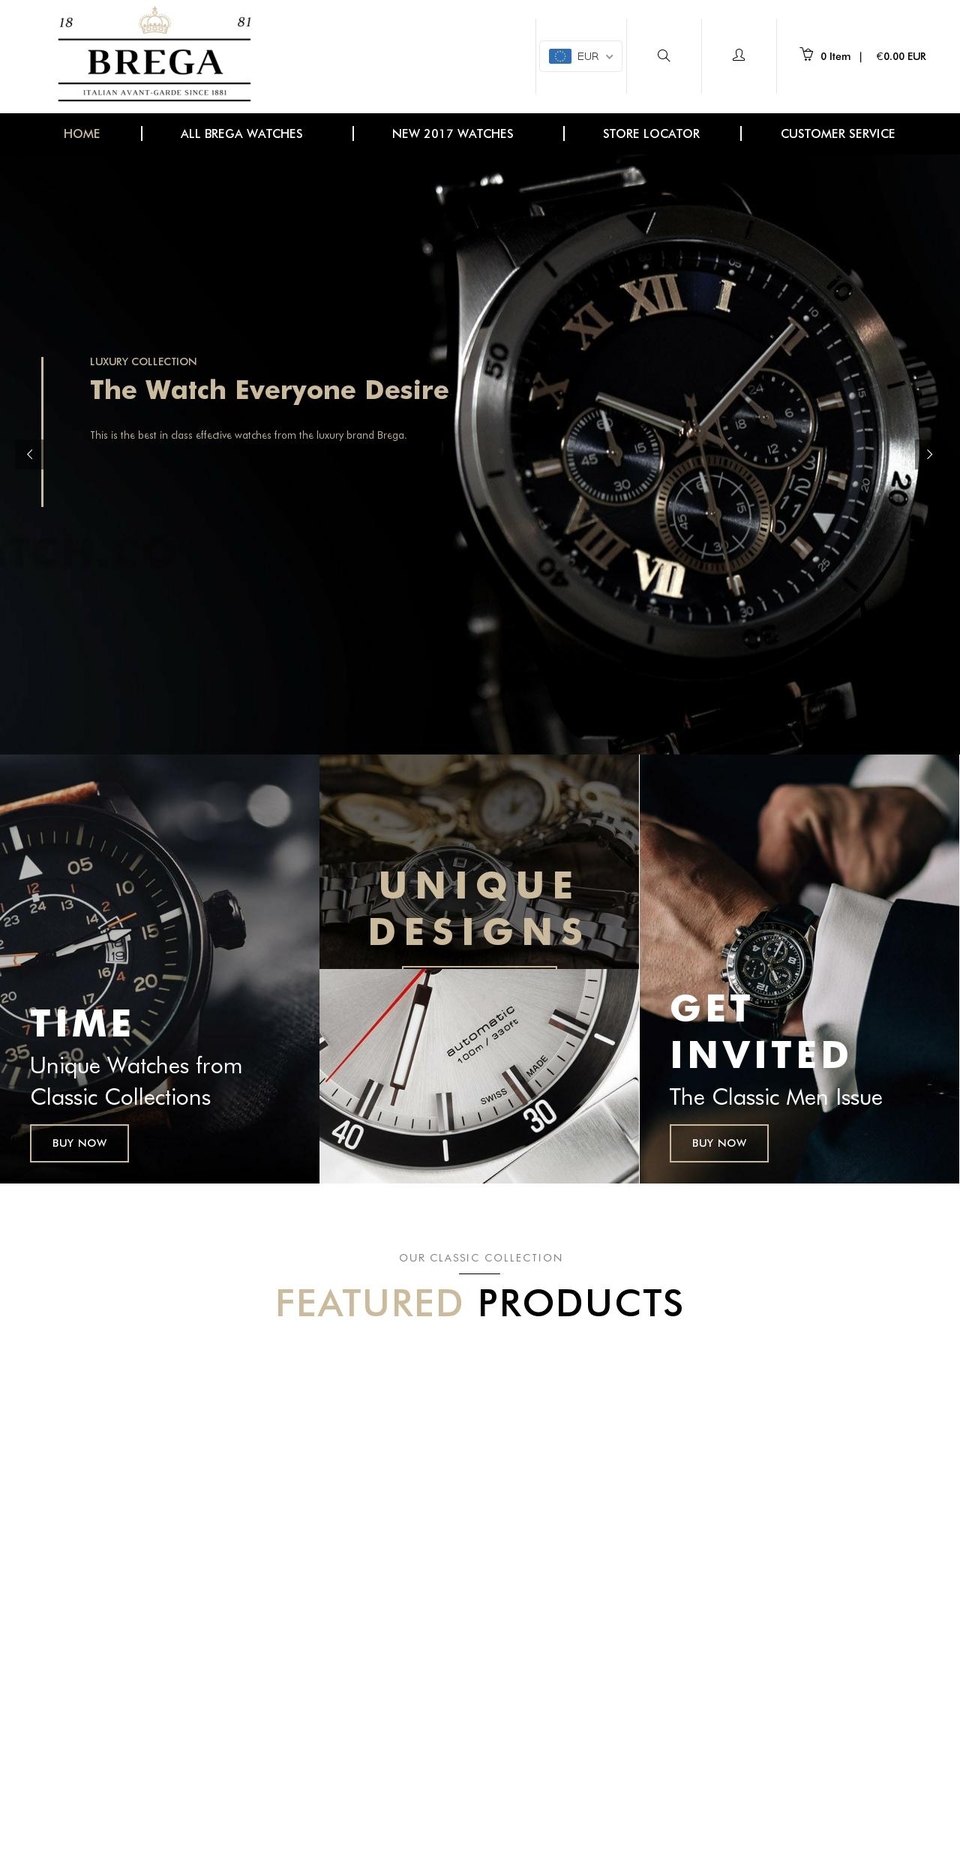 install Shopify theme site example bregawatches.com